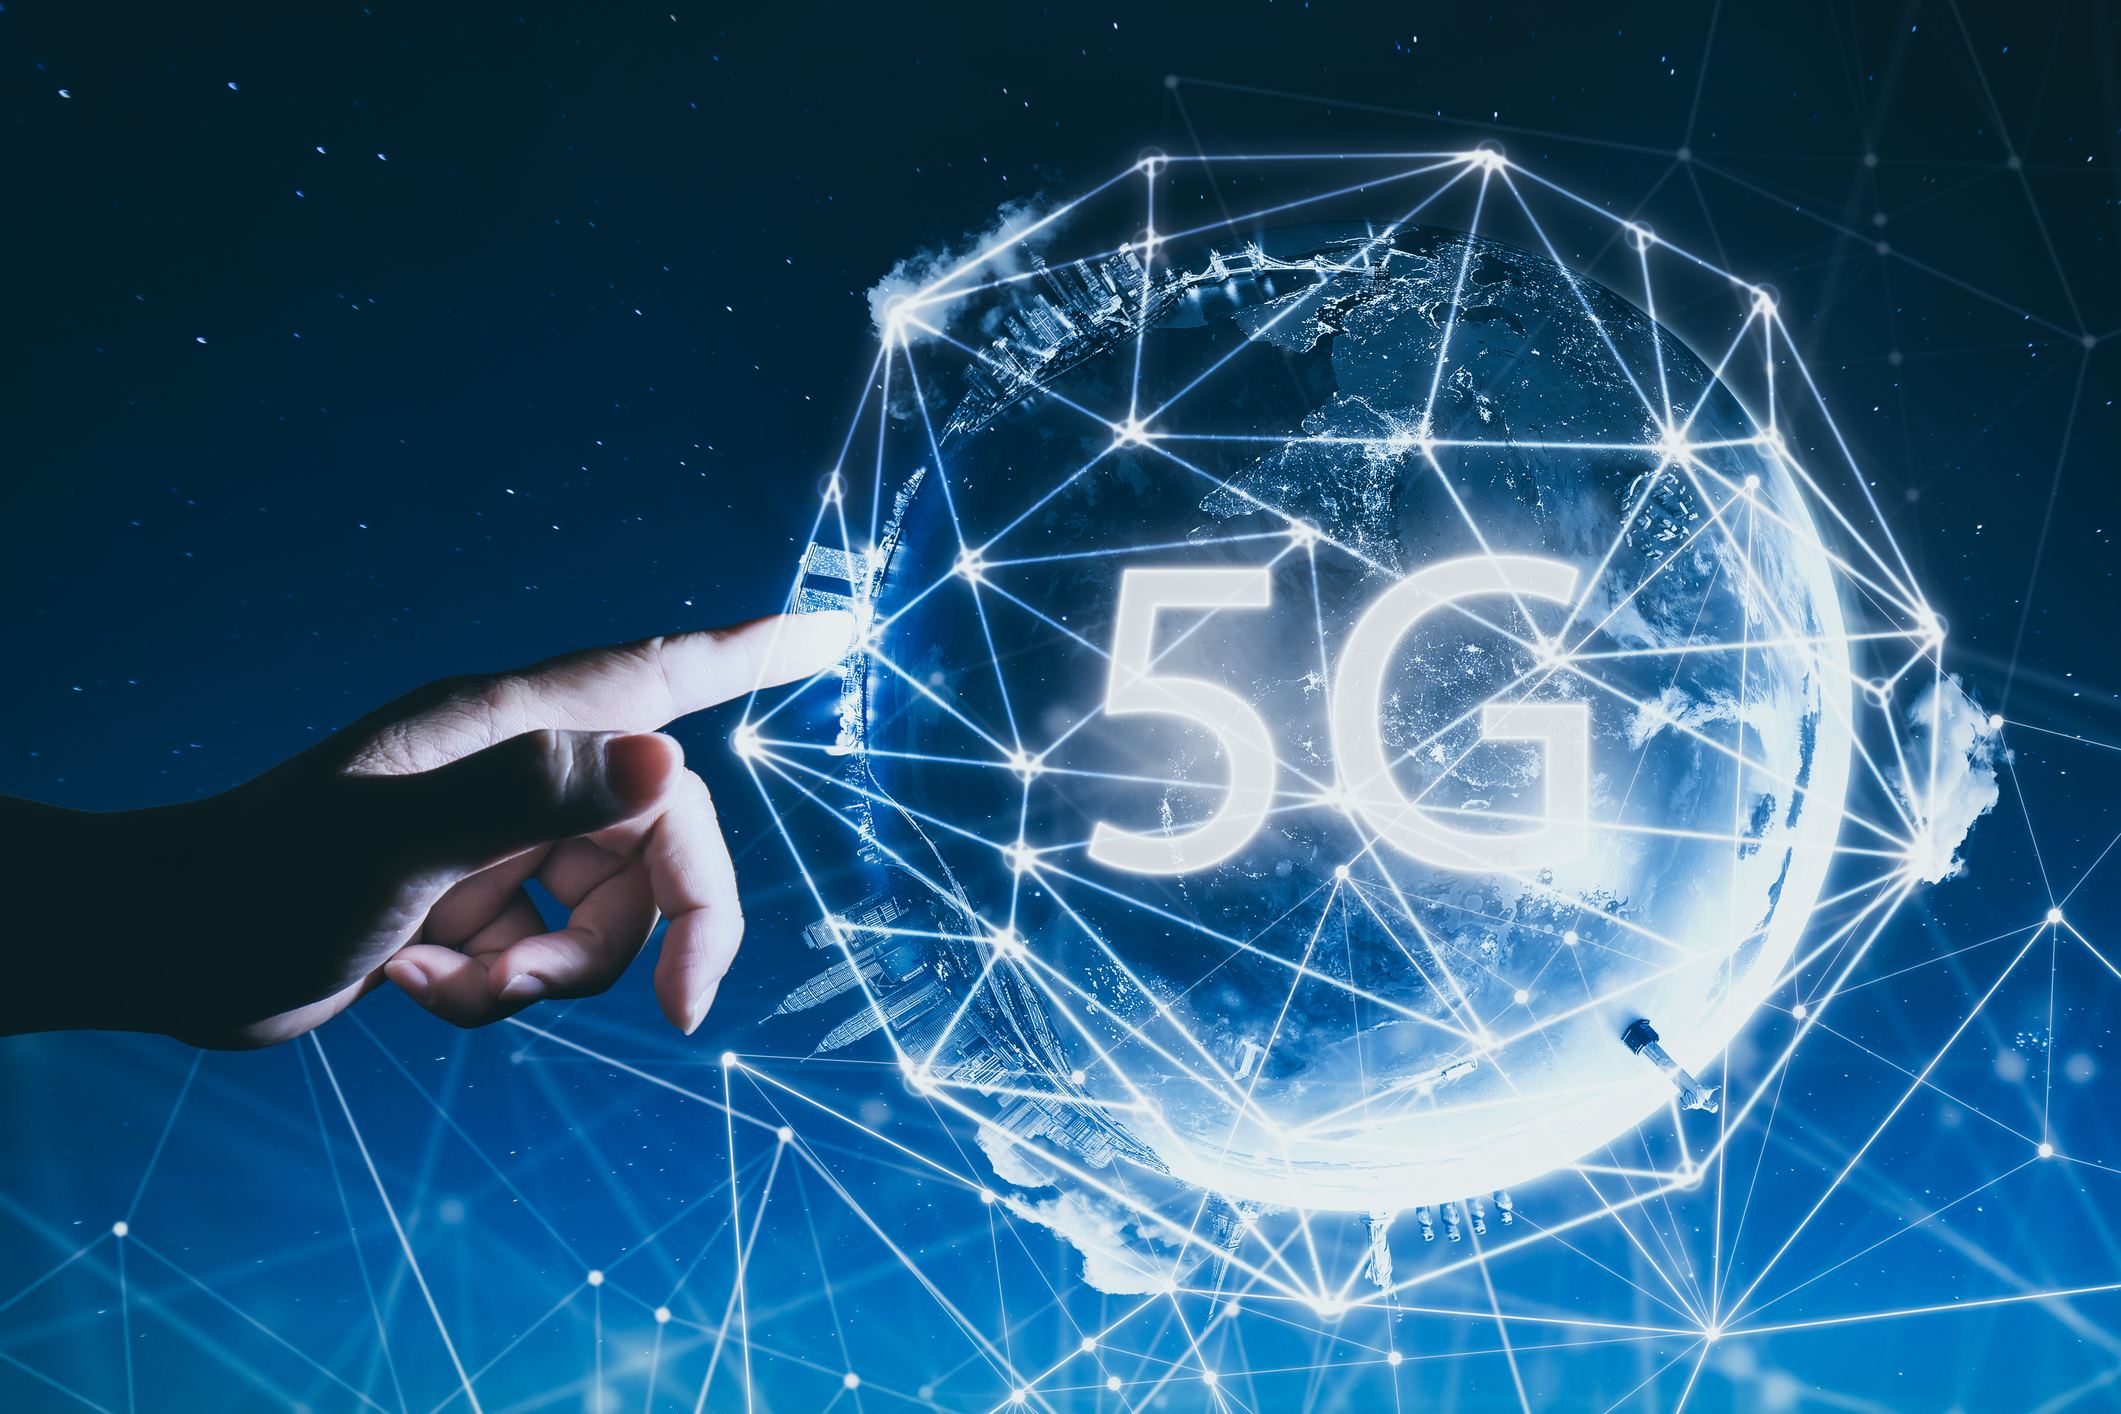 The digital future requires making 5G secure